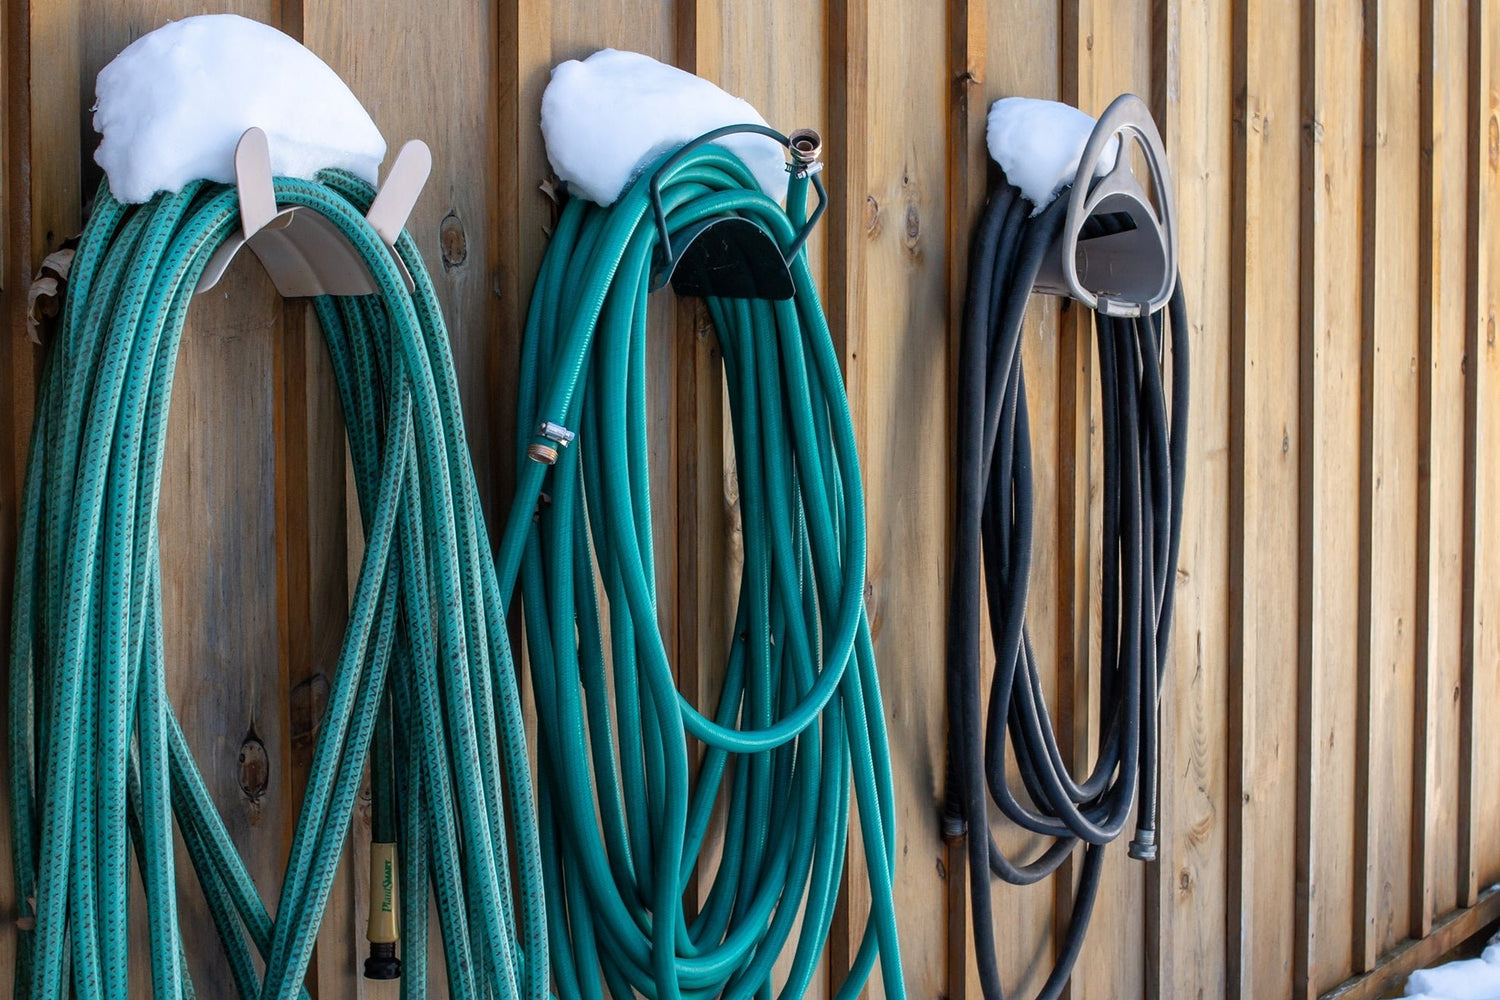 Five Easy Ways To Keep Your Garden Hose From Freezing - Giraffe Tools